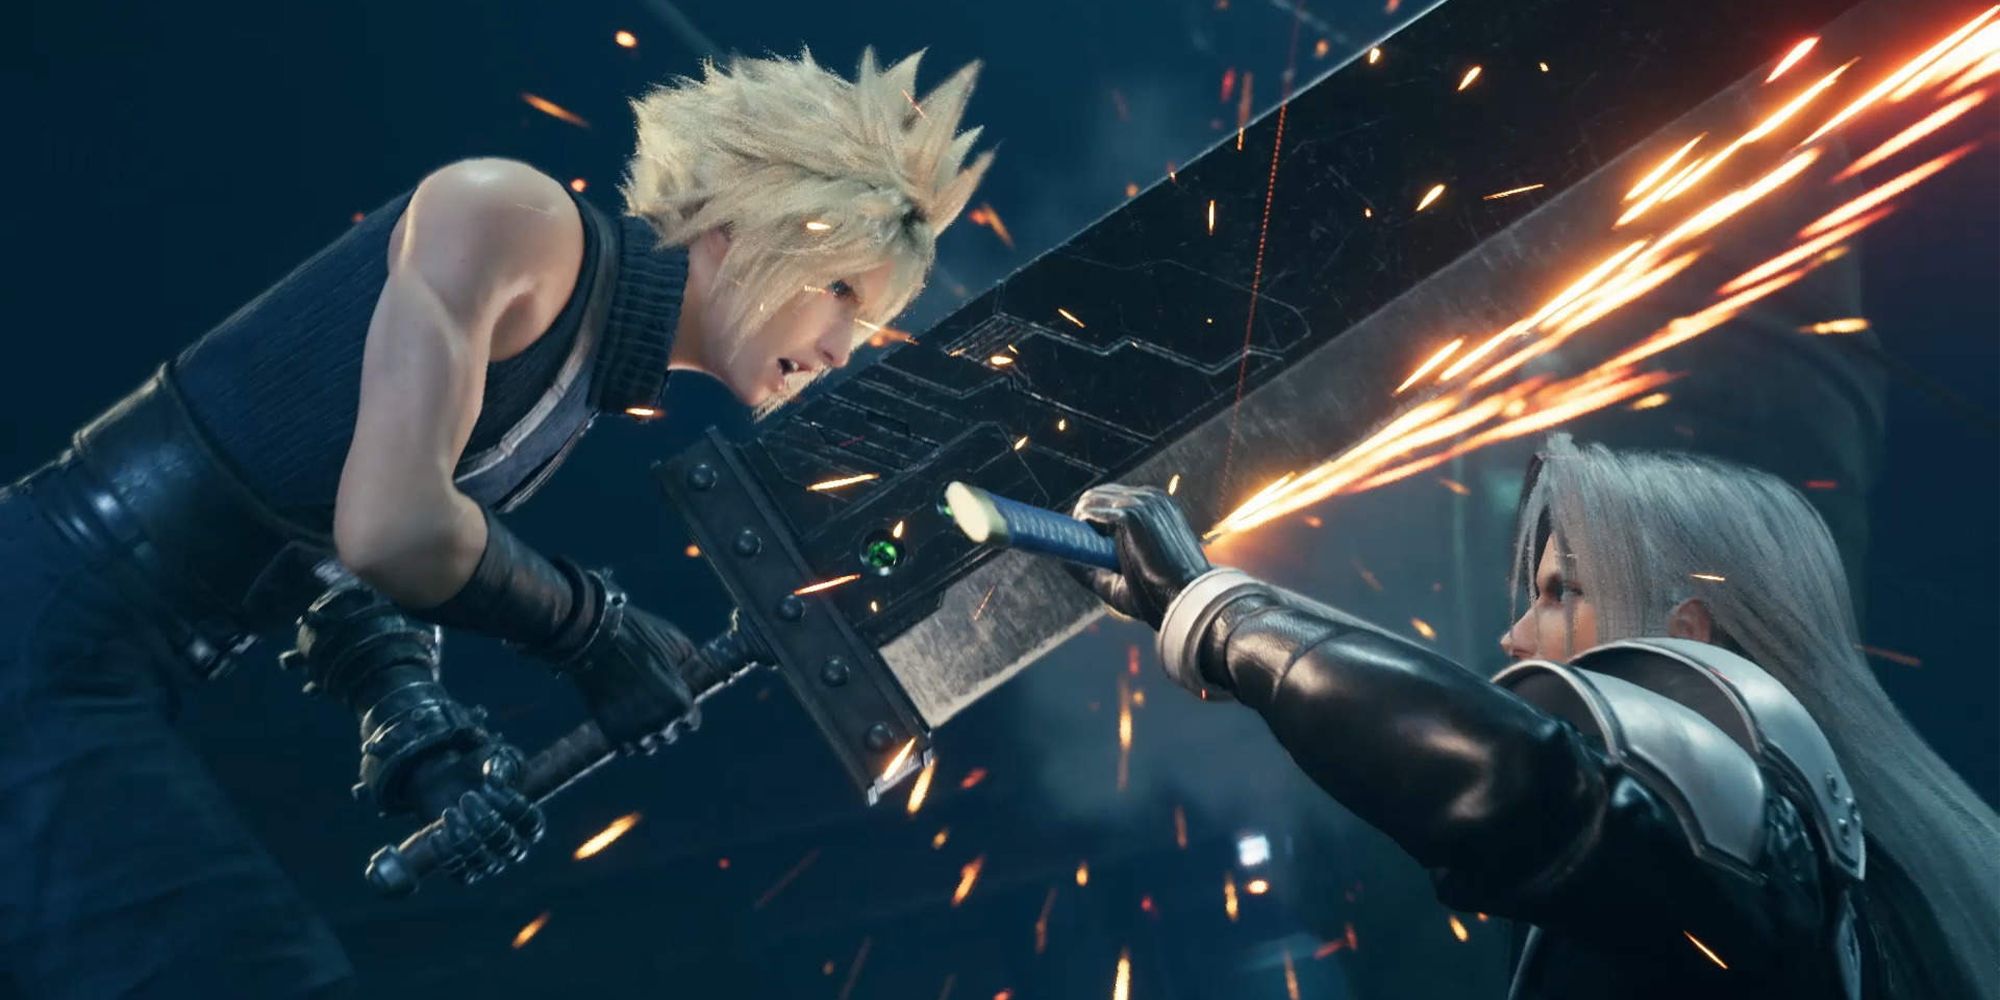 FF7 Remake Timed PlayStation Exlclusivity Deal Runs Out This Week